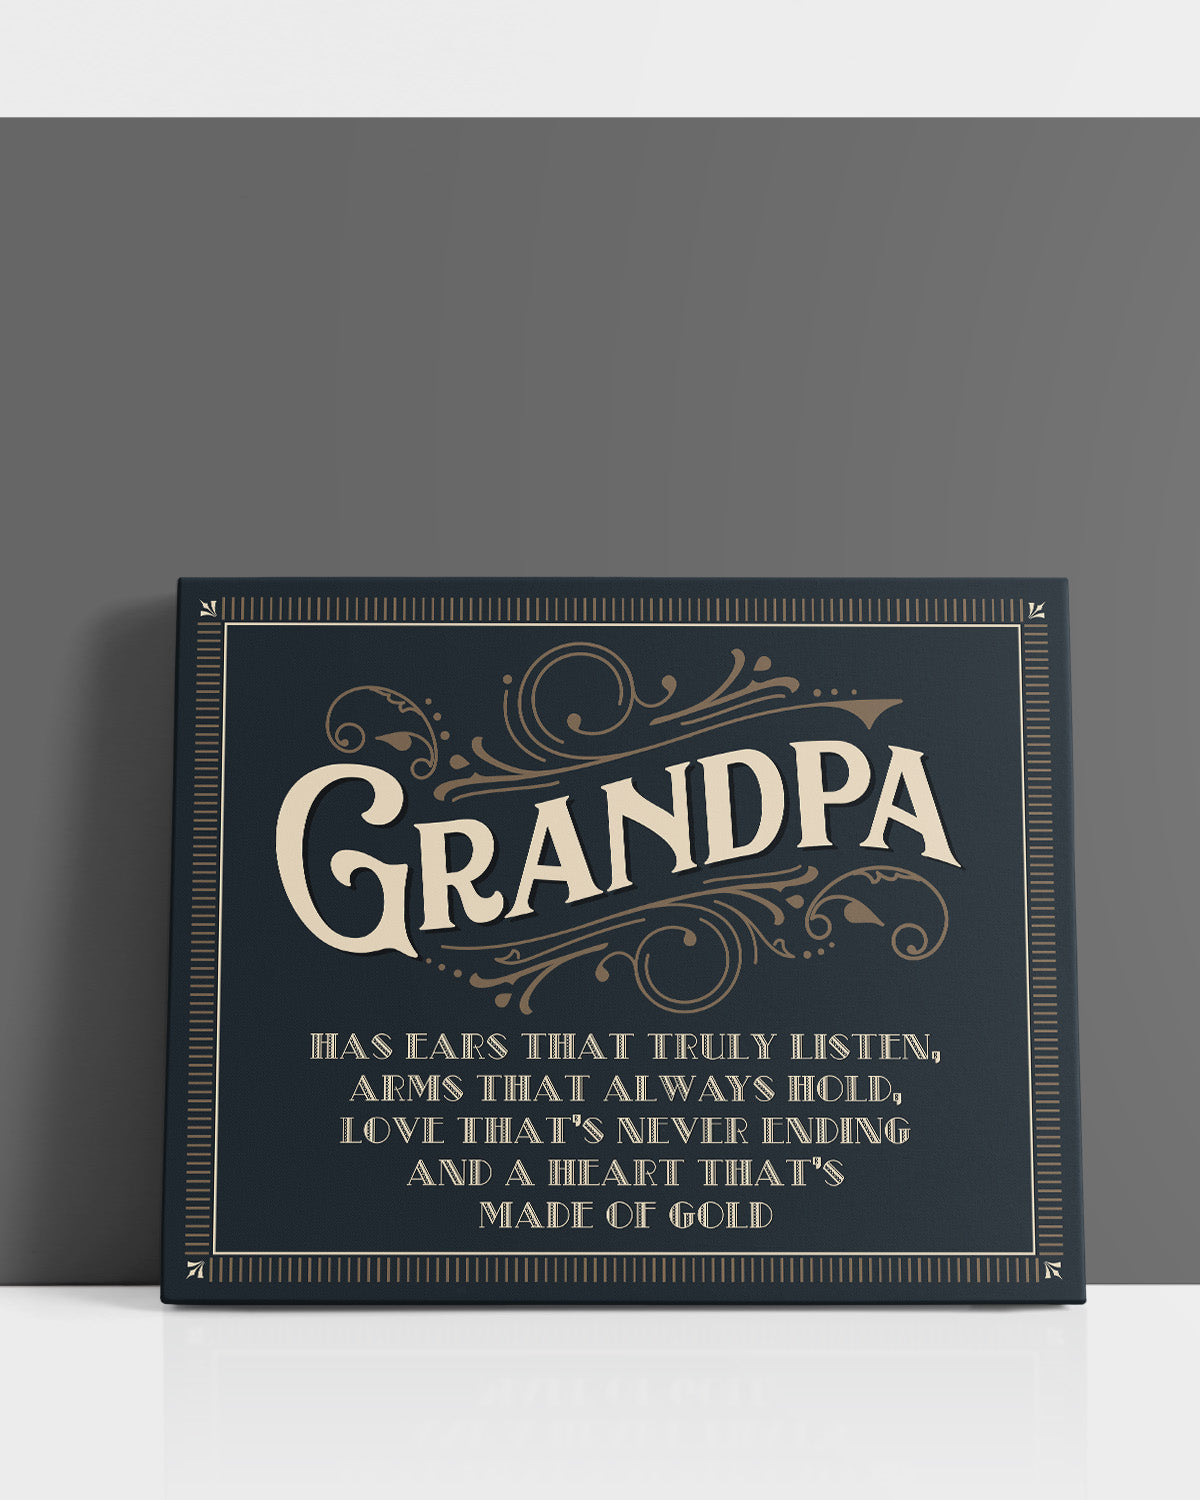 Grandpa Wall Art from Grandkids - Grandparents Day Gift Ideas - Best Gifts for Grandfather Wall Decor - Grandparent Gift - Gifts for Grandpa